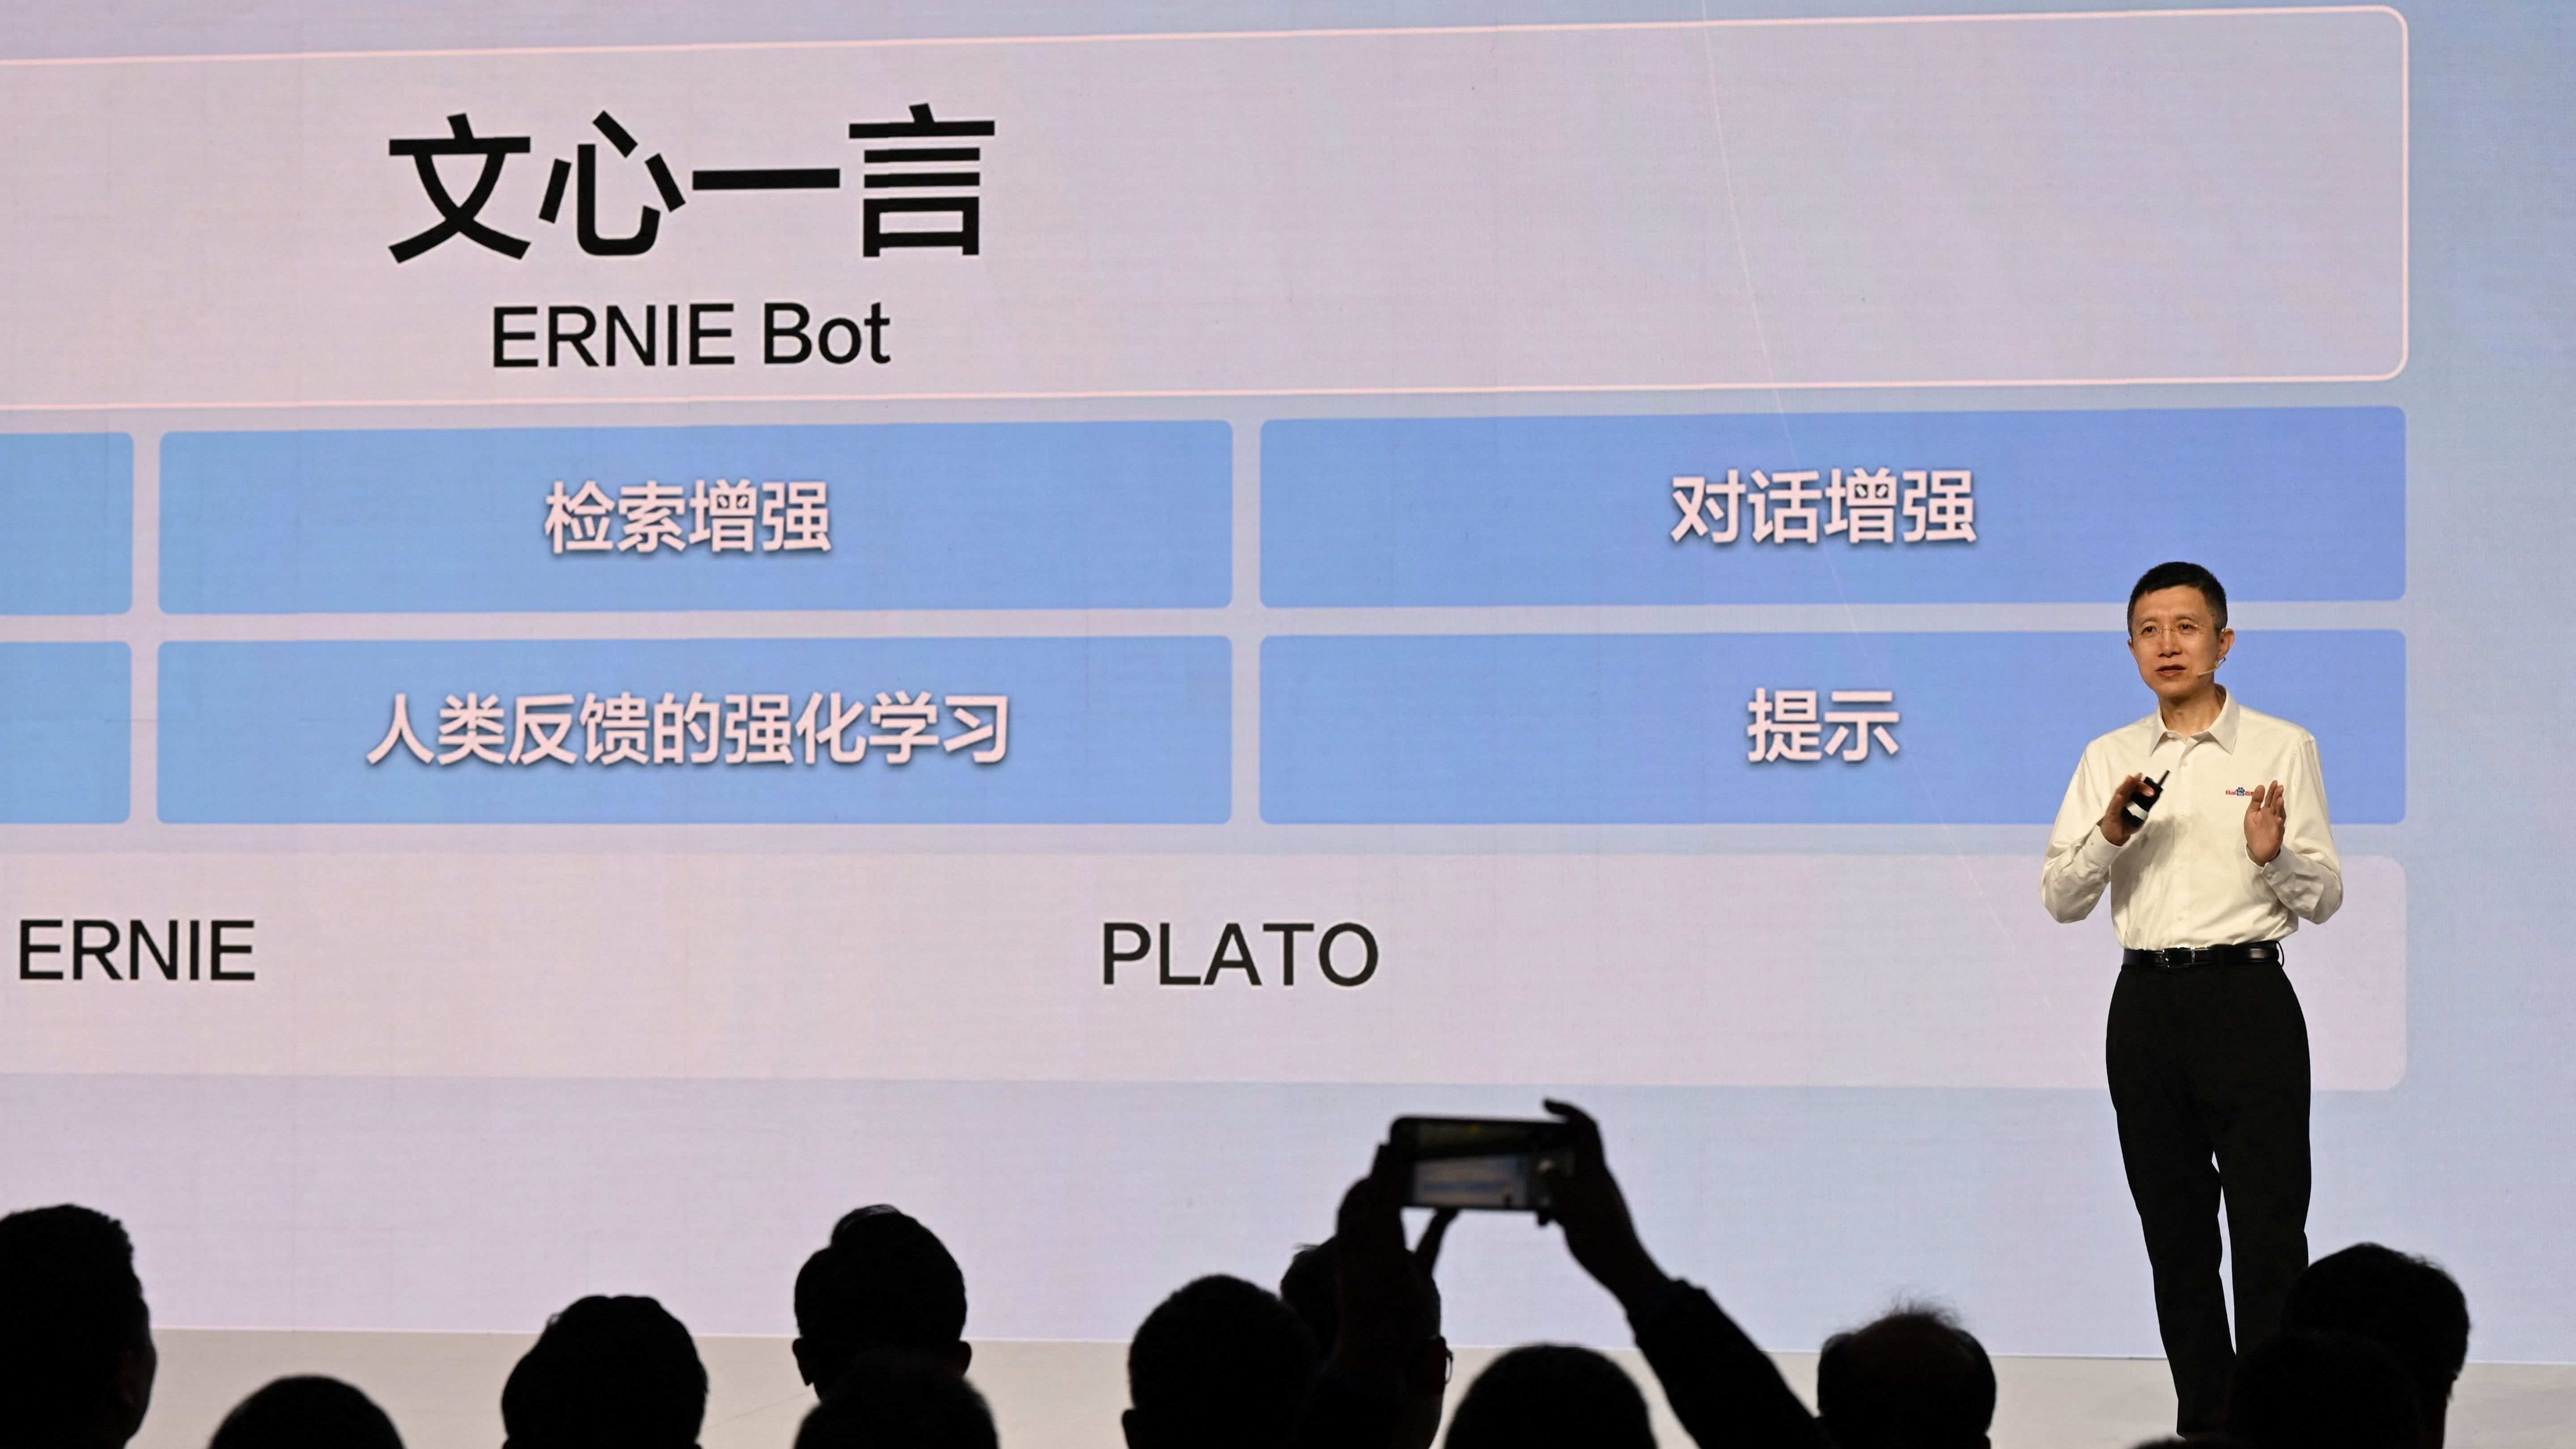 Baidu co-founder and CEO Robin Li speaks at the unveiling of Baidu’s AI chatbot “Ernie Bot” at an event in Beijing. Credit: AFP Photo